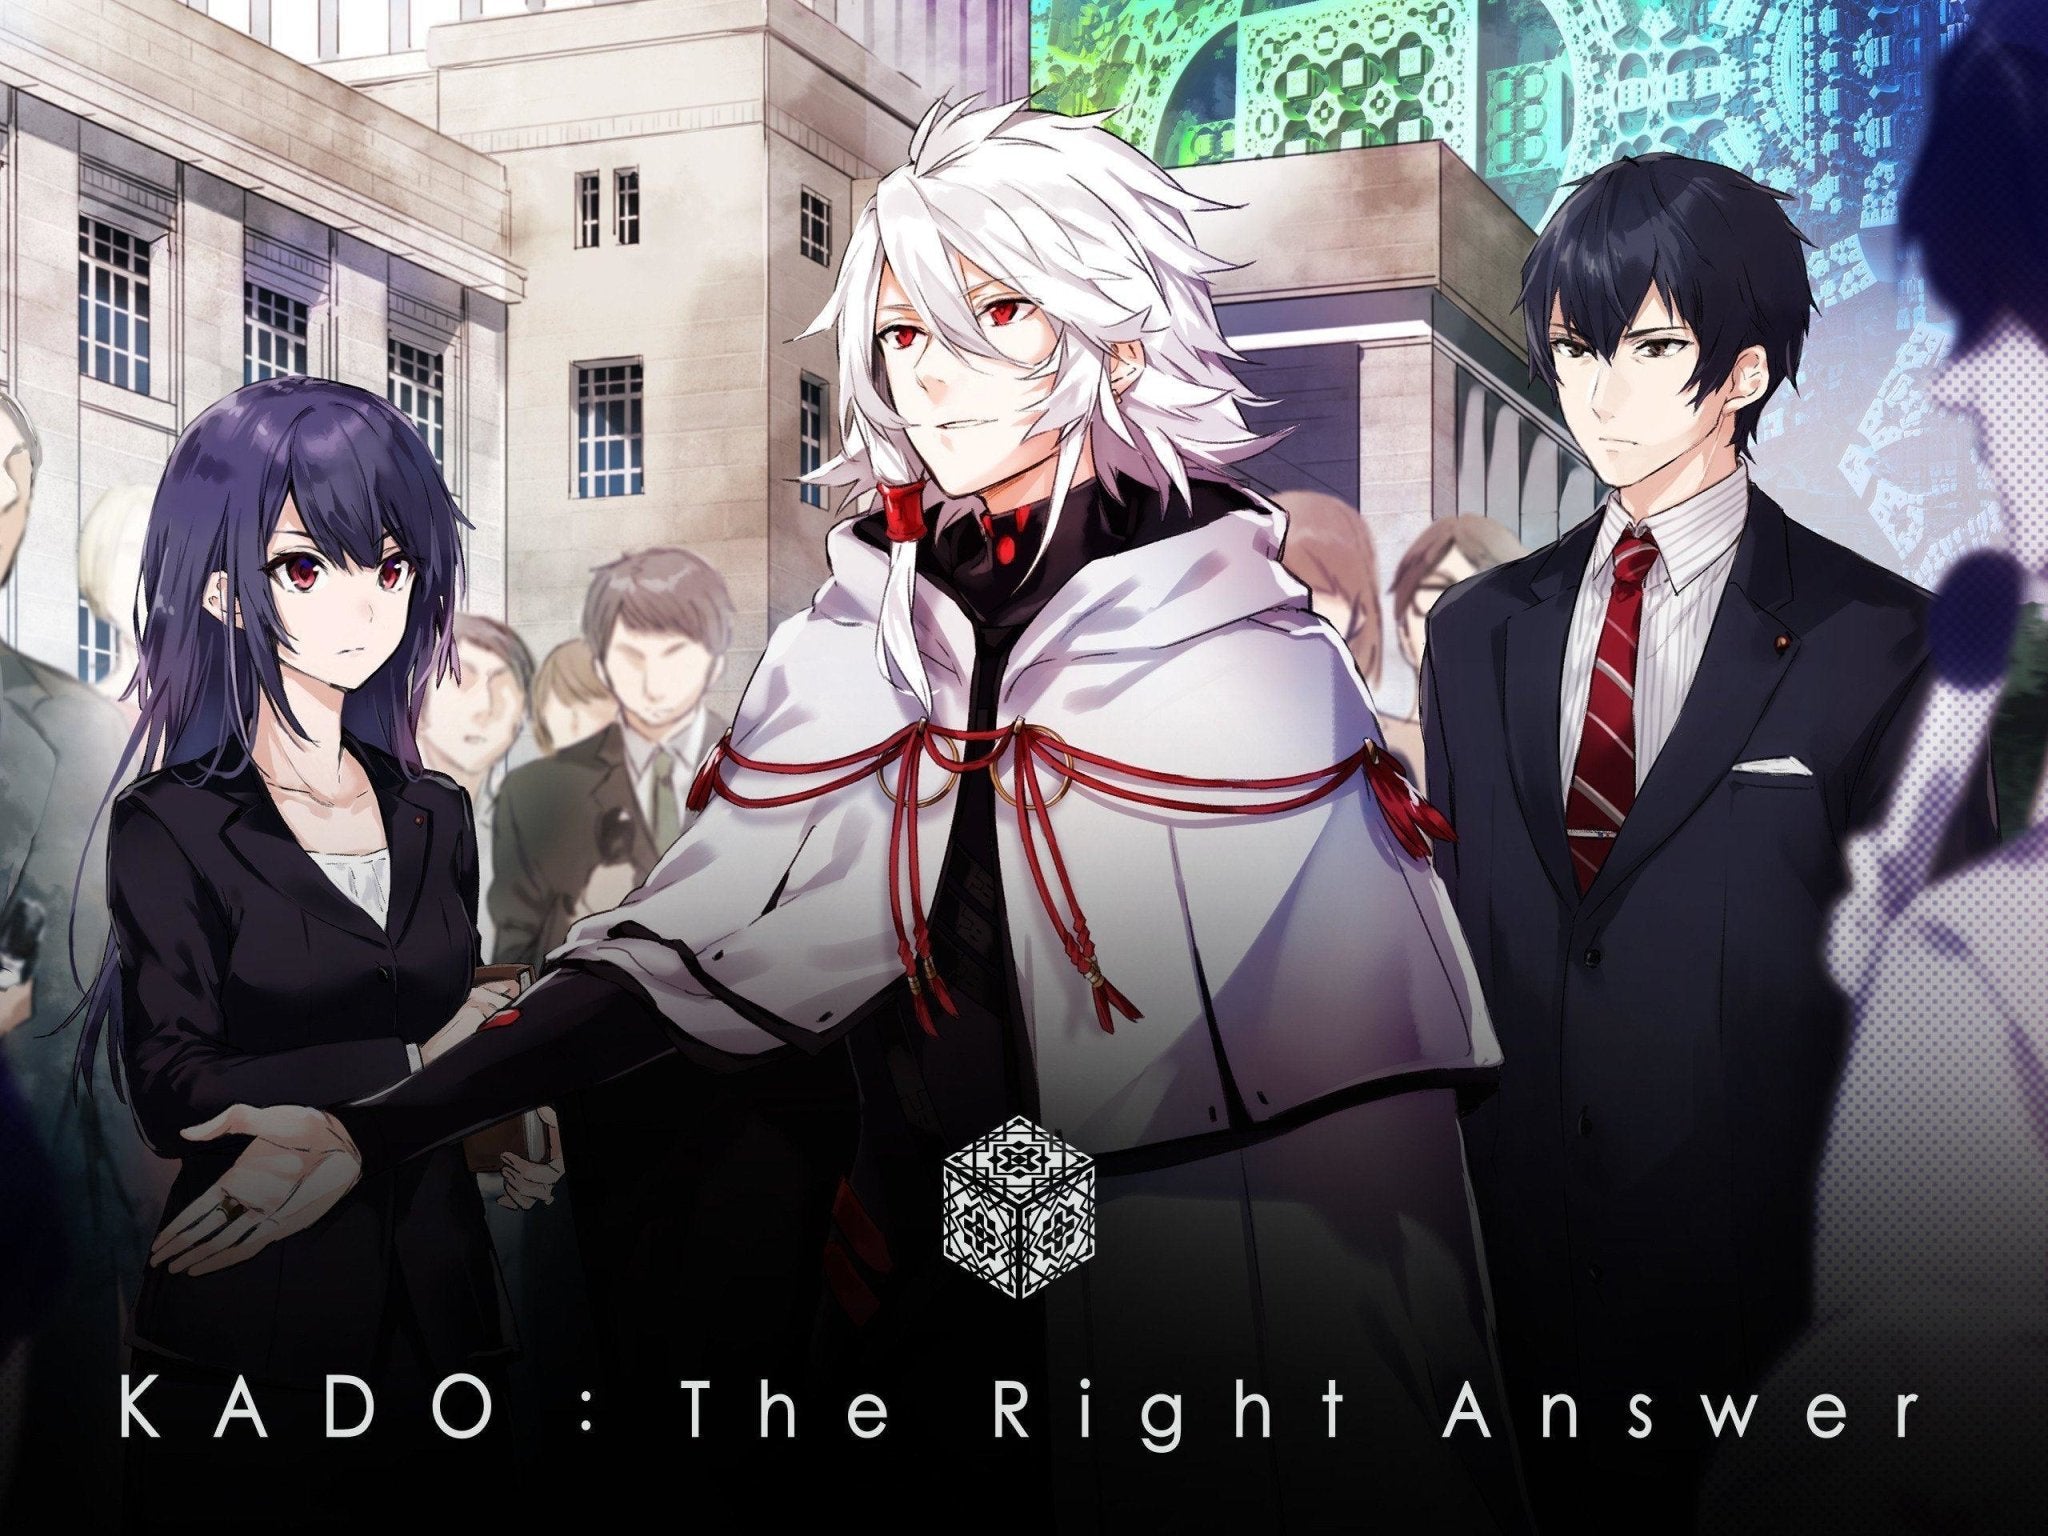 When Does Demon Lord Retry Season 2 Come Out? Answered